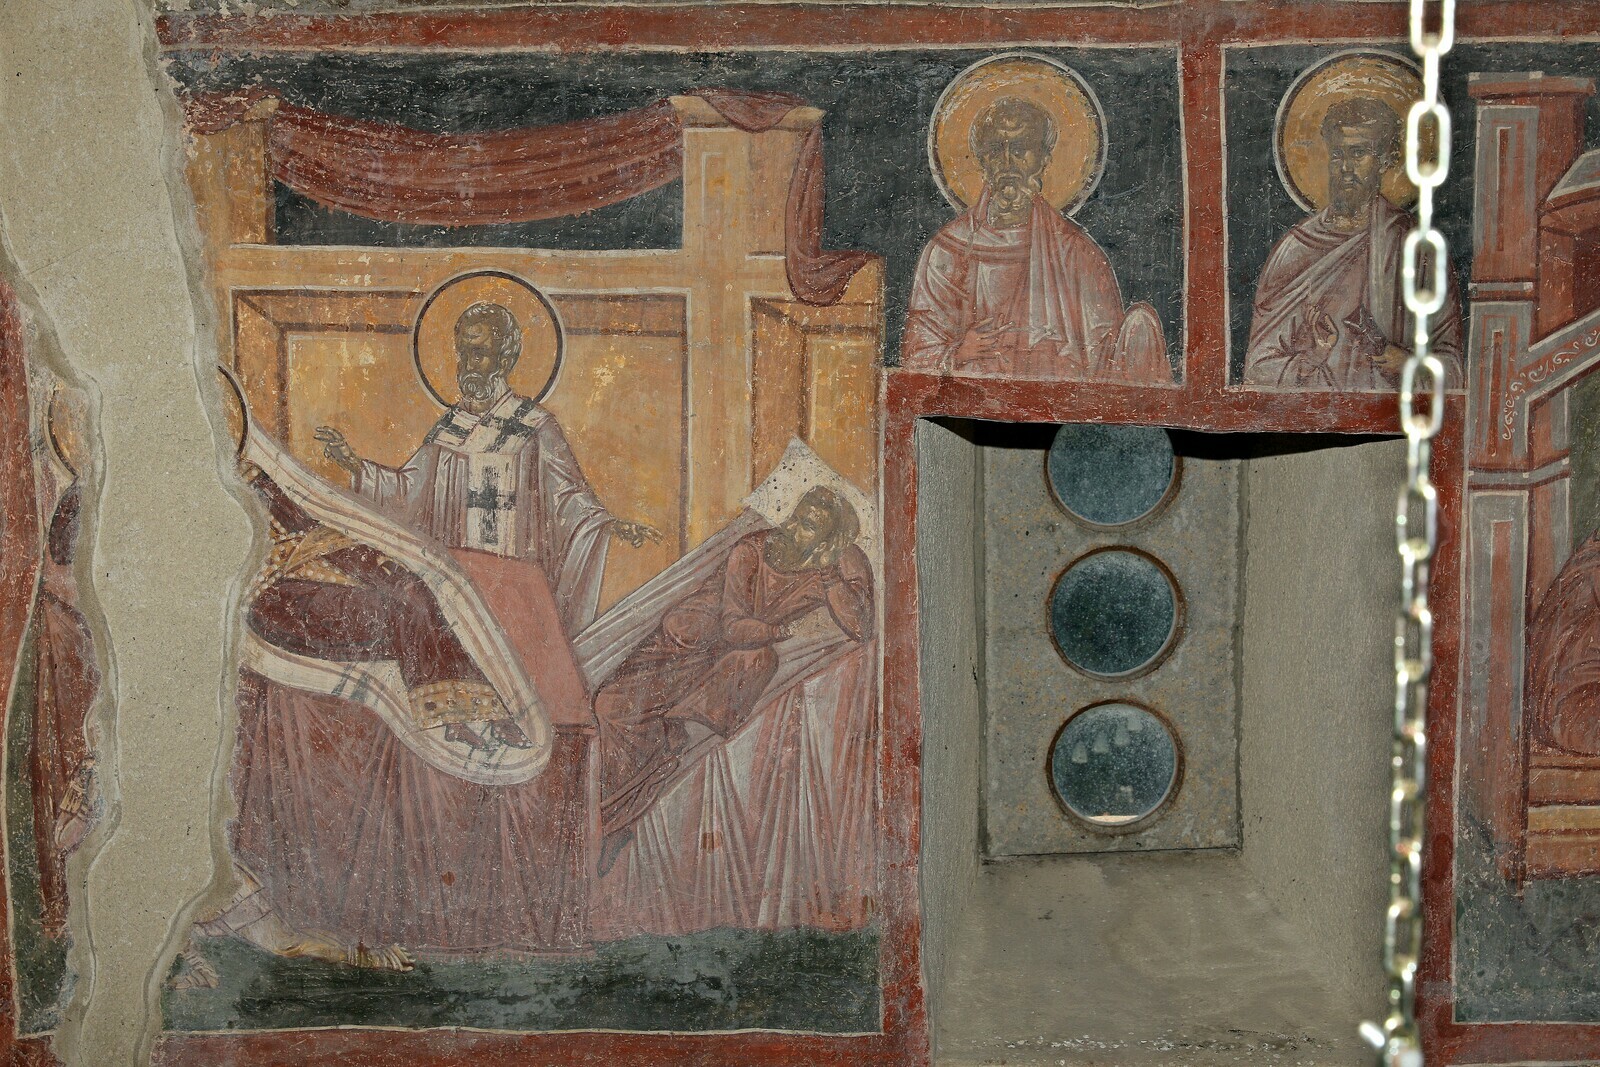 Saint Nicholas Appearing to Constantine and Ablabius in Their Dreams